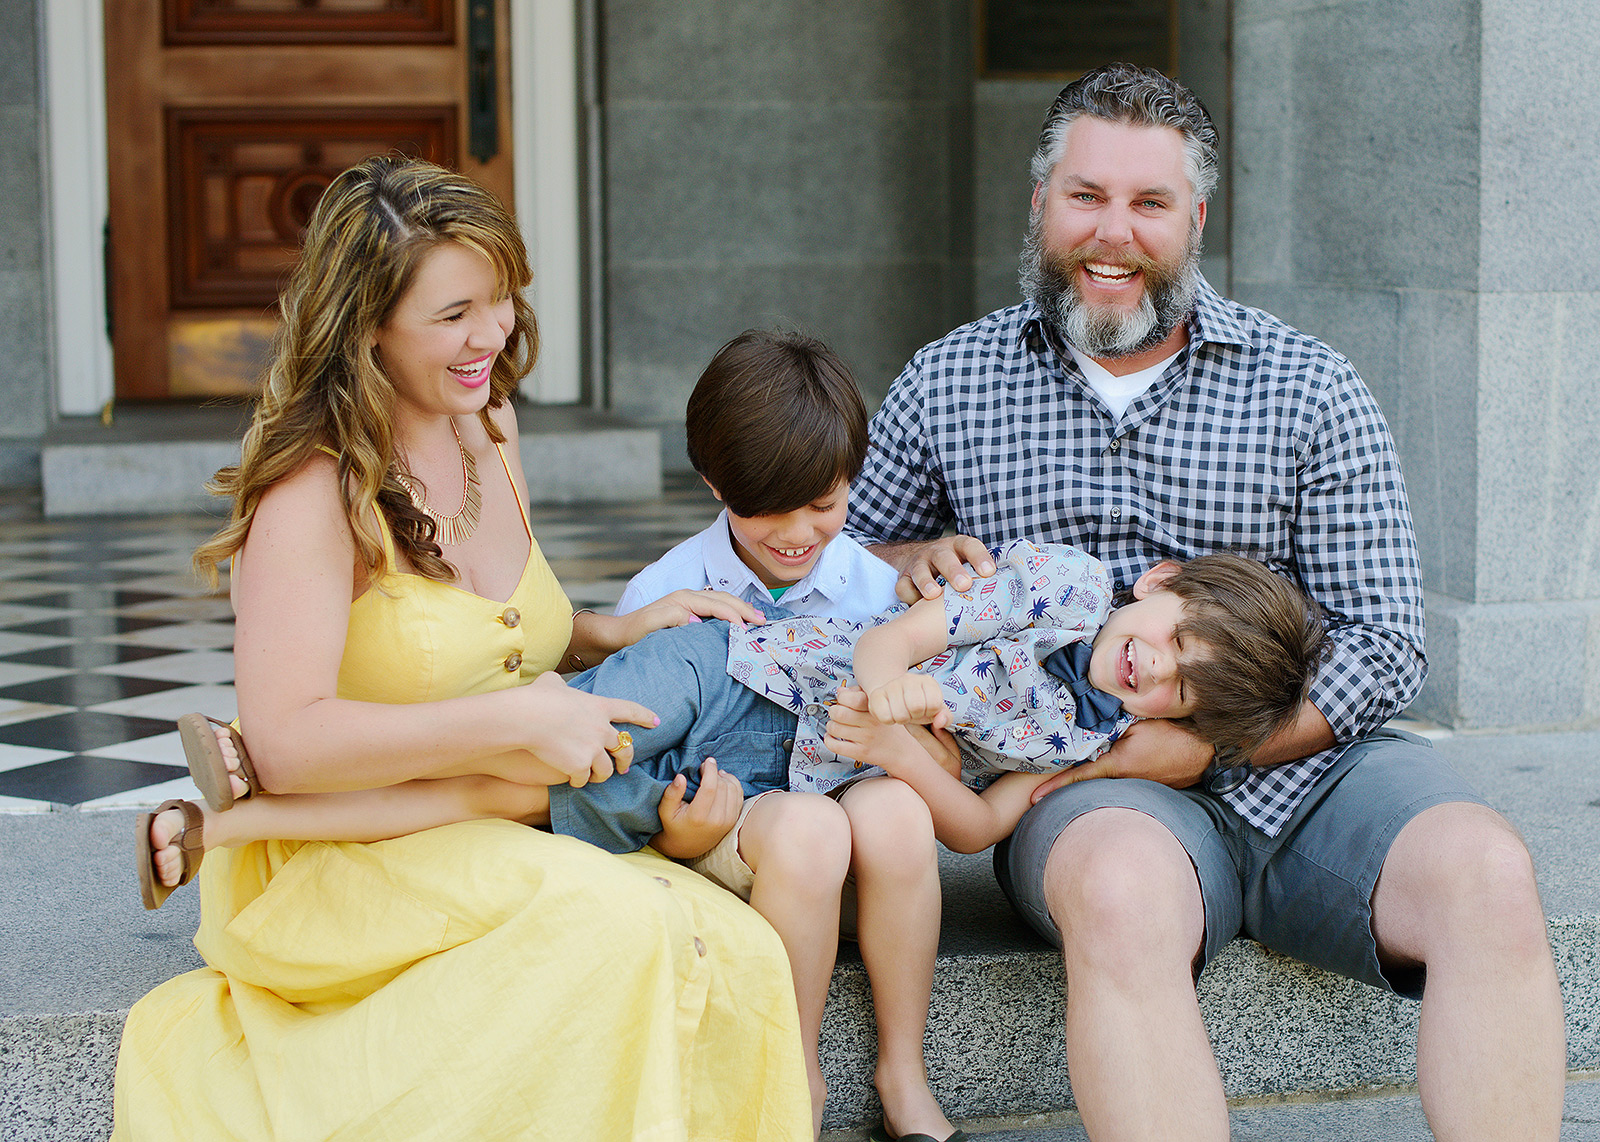 Fun family photos with laughs and a yellow dress at the sacramento capitol